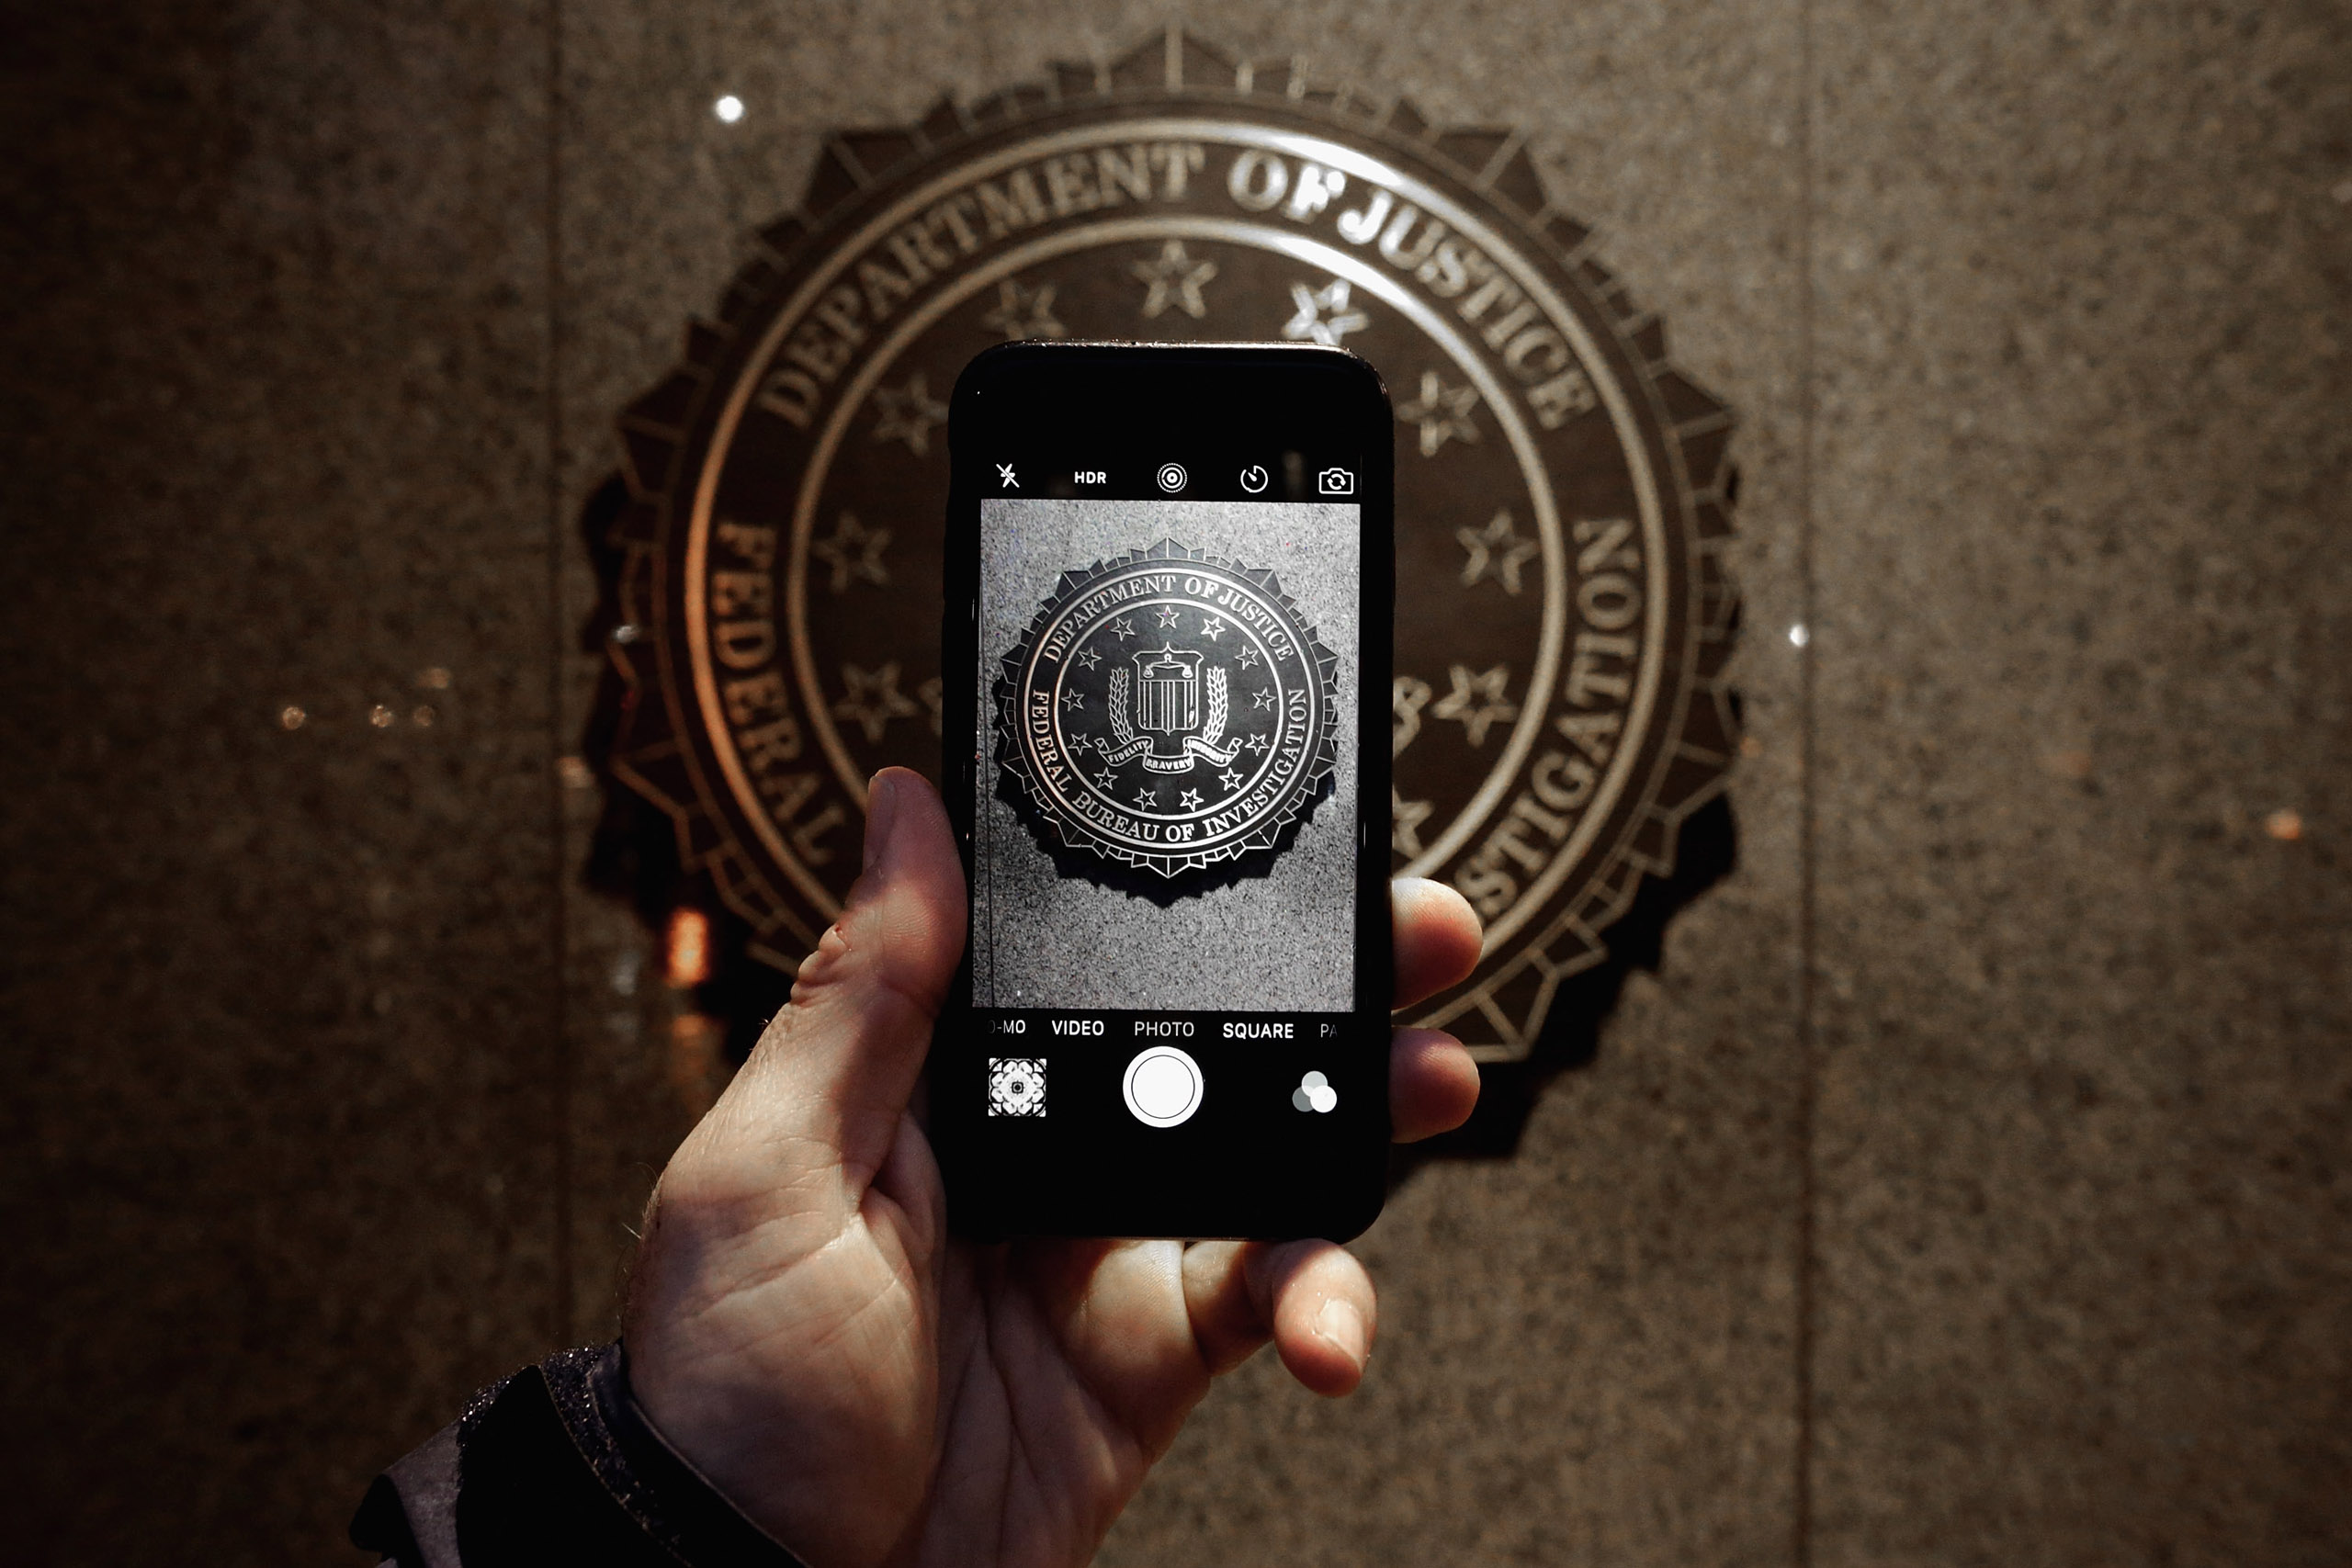 The official seal of the Federal Bureau of Investigation is seen on an iPhone's camera screen outside the J. Edgar Hoover headquarters in Washington, DC, on Feb. 23, 2016. (Chip Somodevilla—Getty Images)